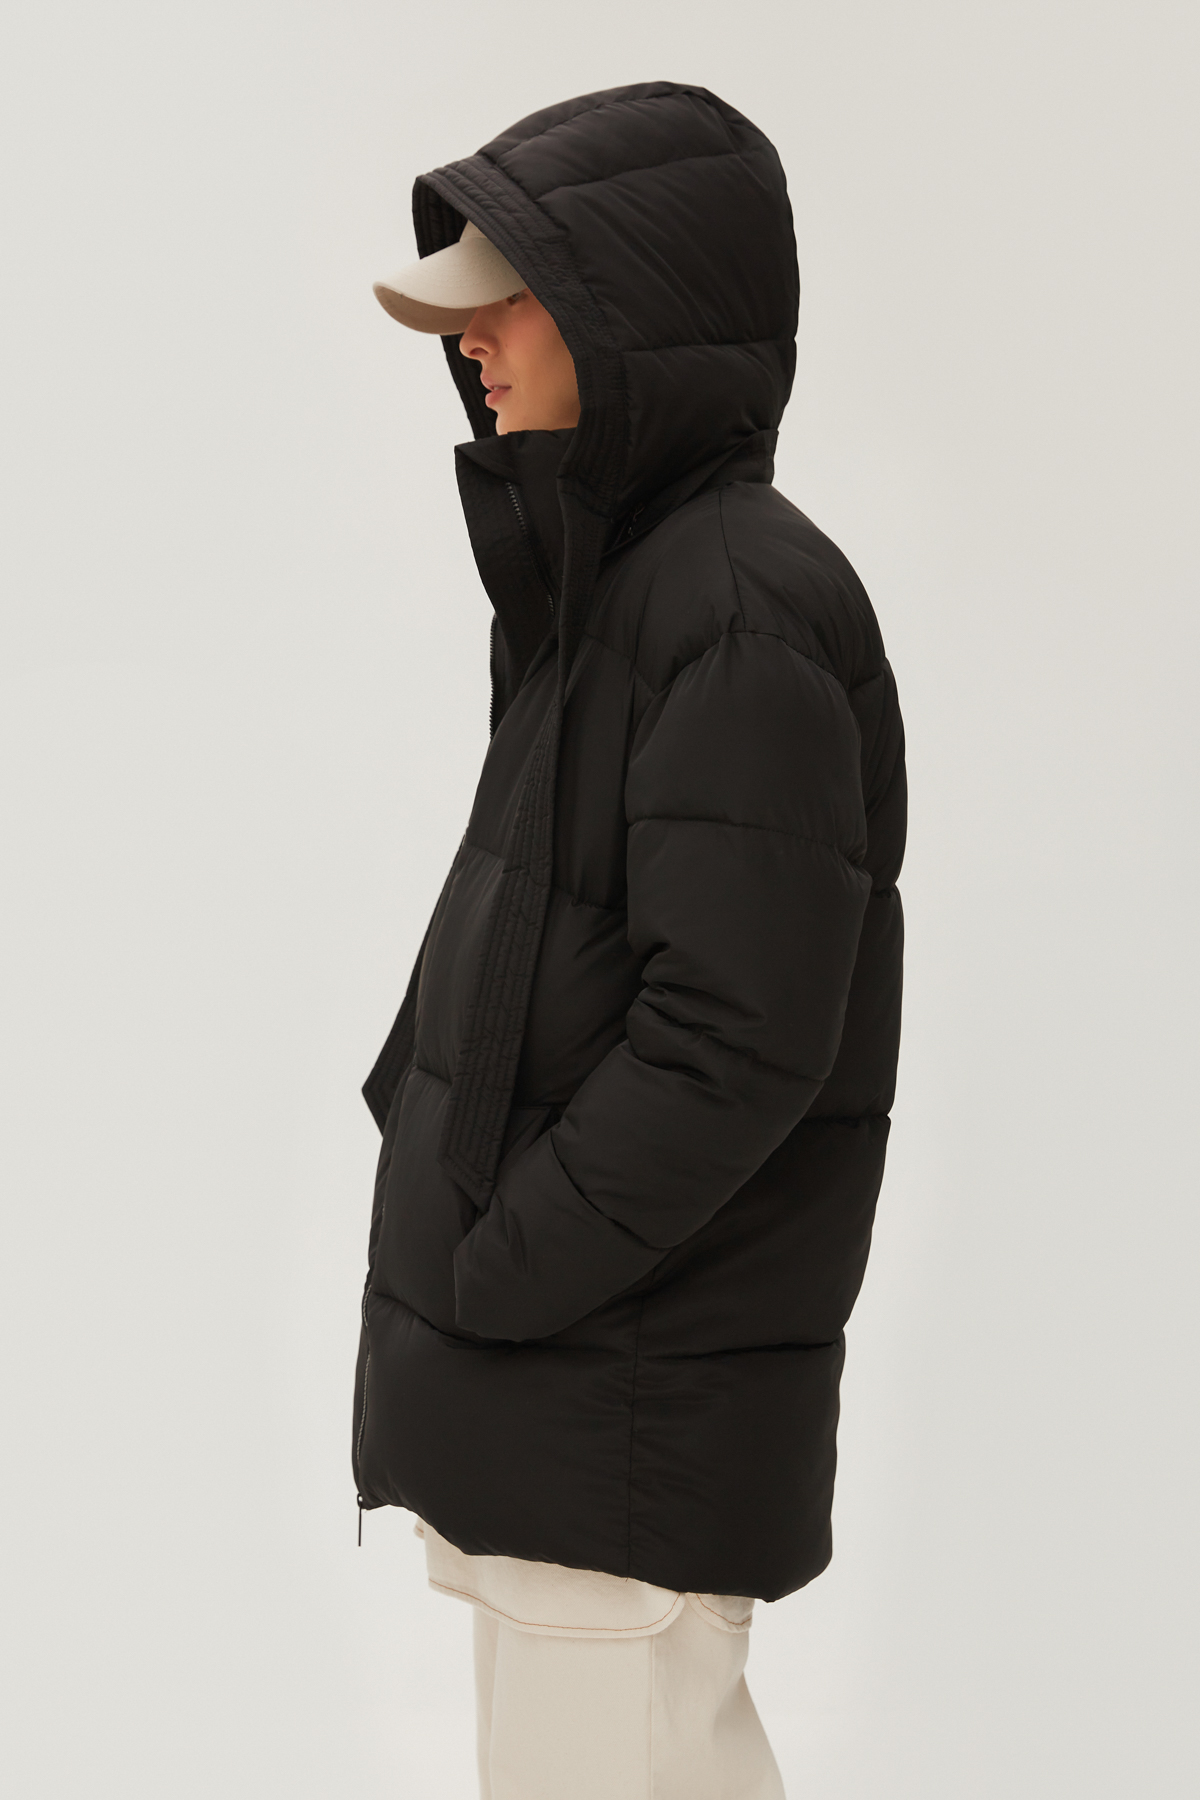 Black quilted jacket with a detachable hood, photo 2